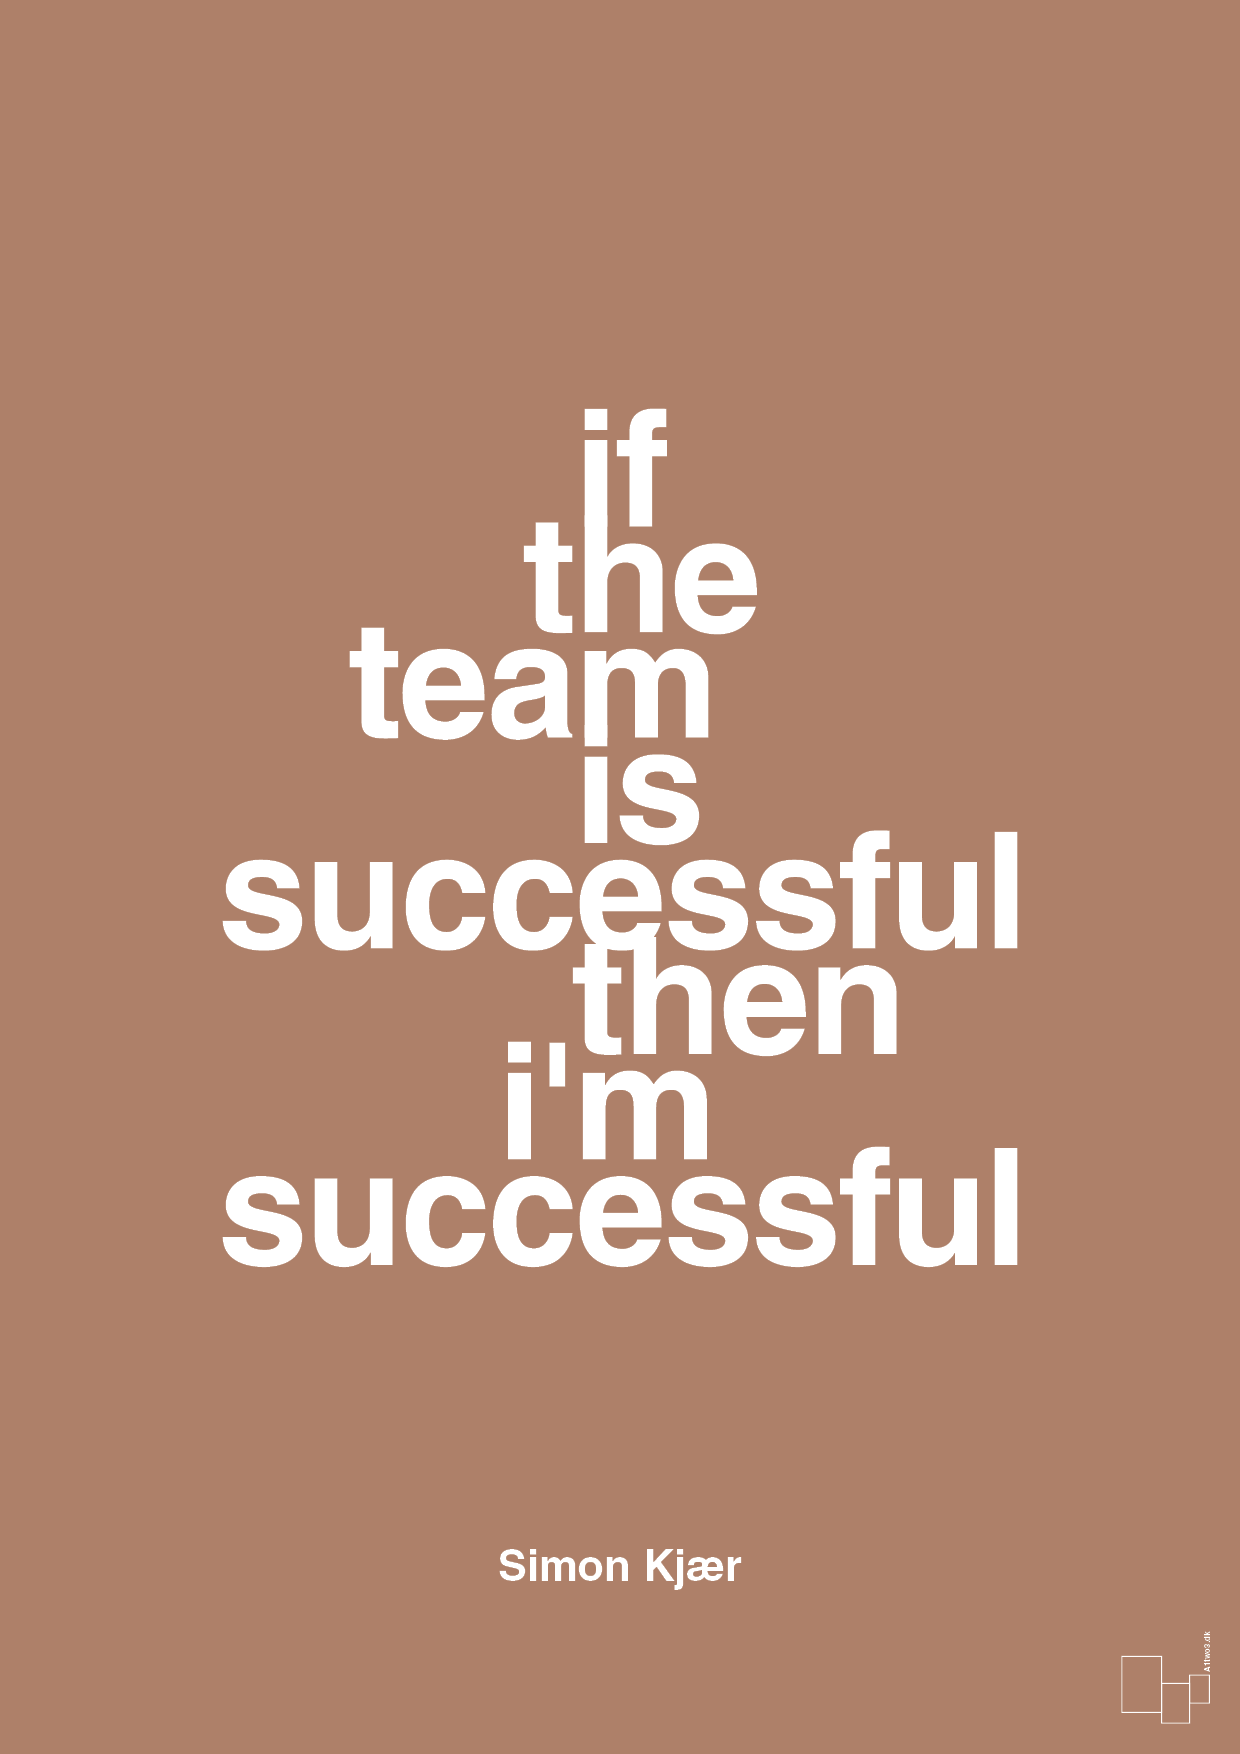 if the team is successful then i'm successful - Plakat med Citater i Cider Spice